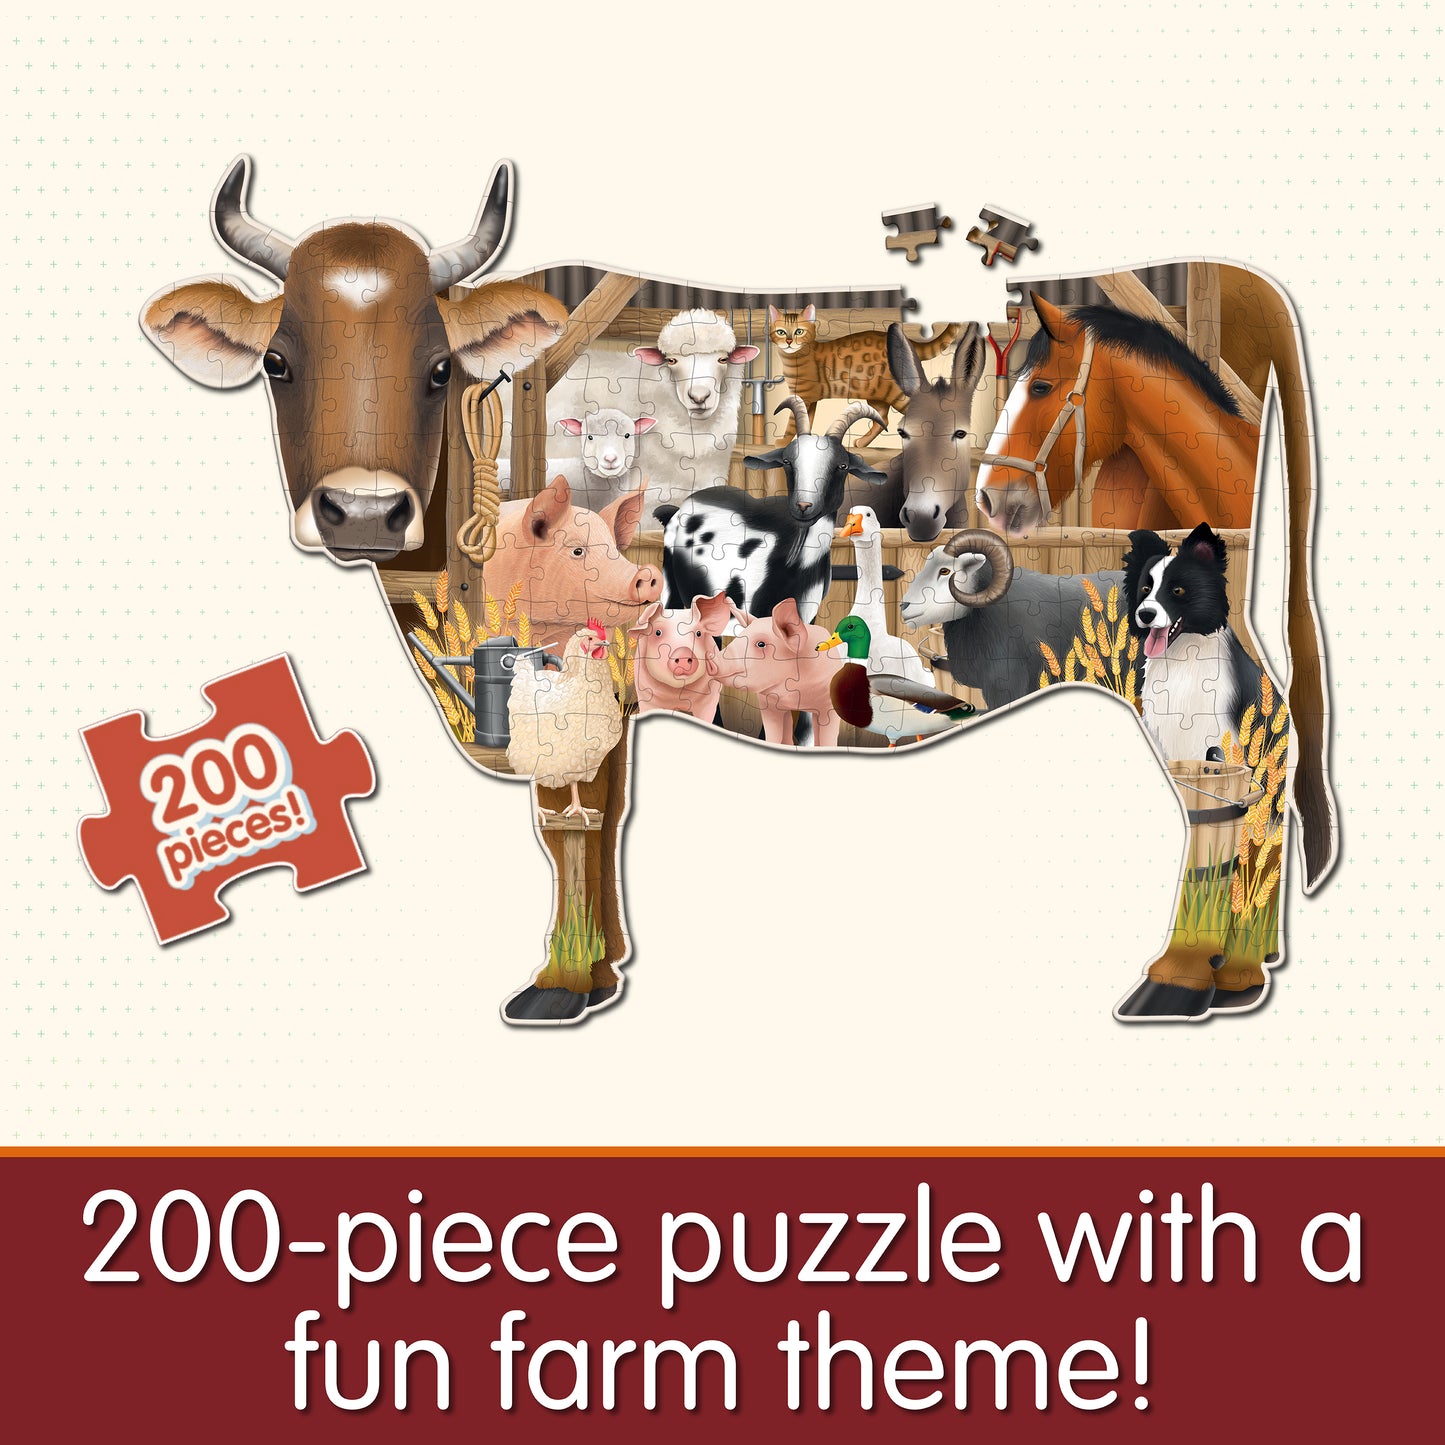 Infographic about Wildlife World Farm Puzzle that says,"200-piece puzzle with a fun farm theme!"